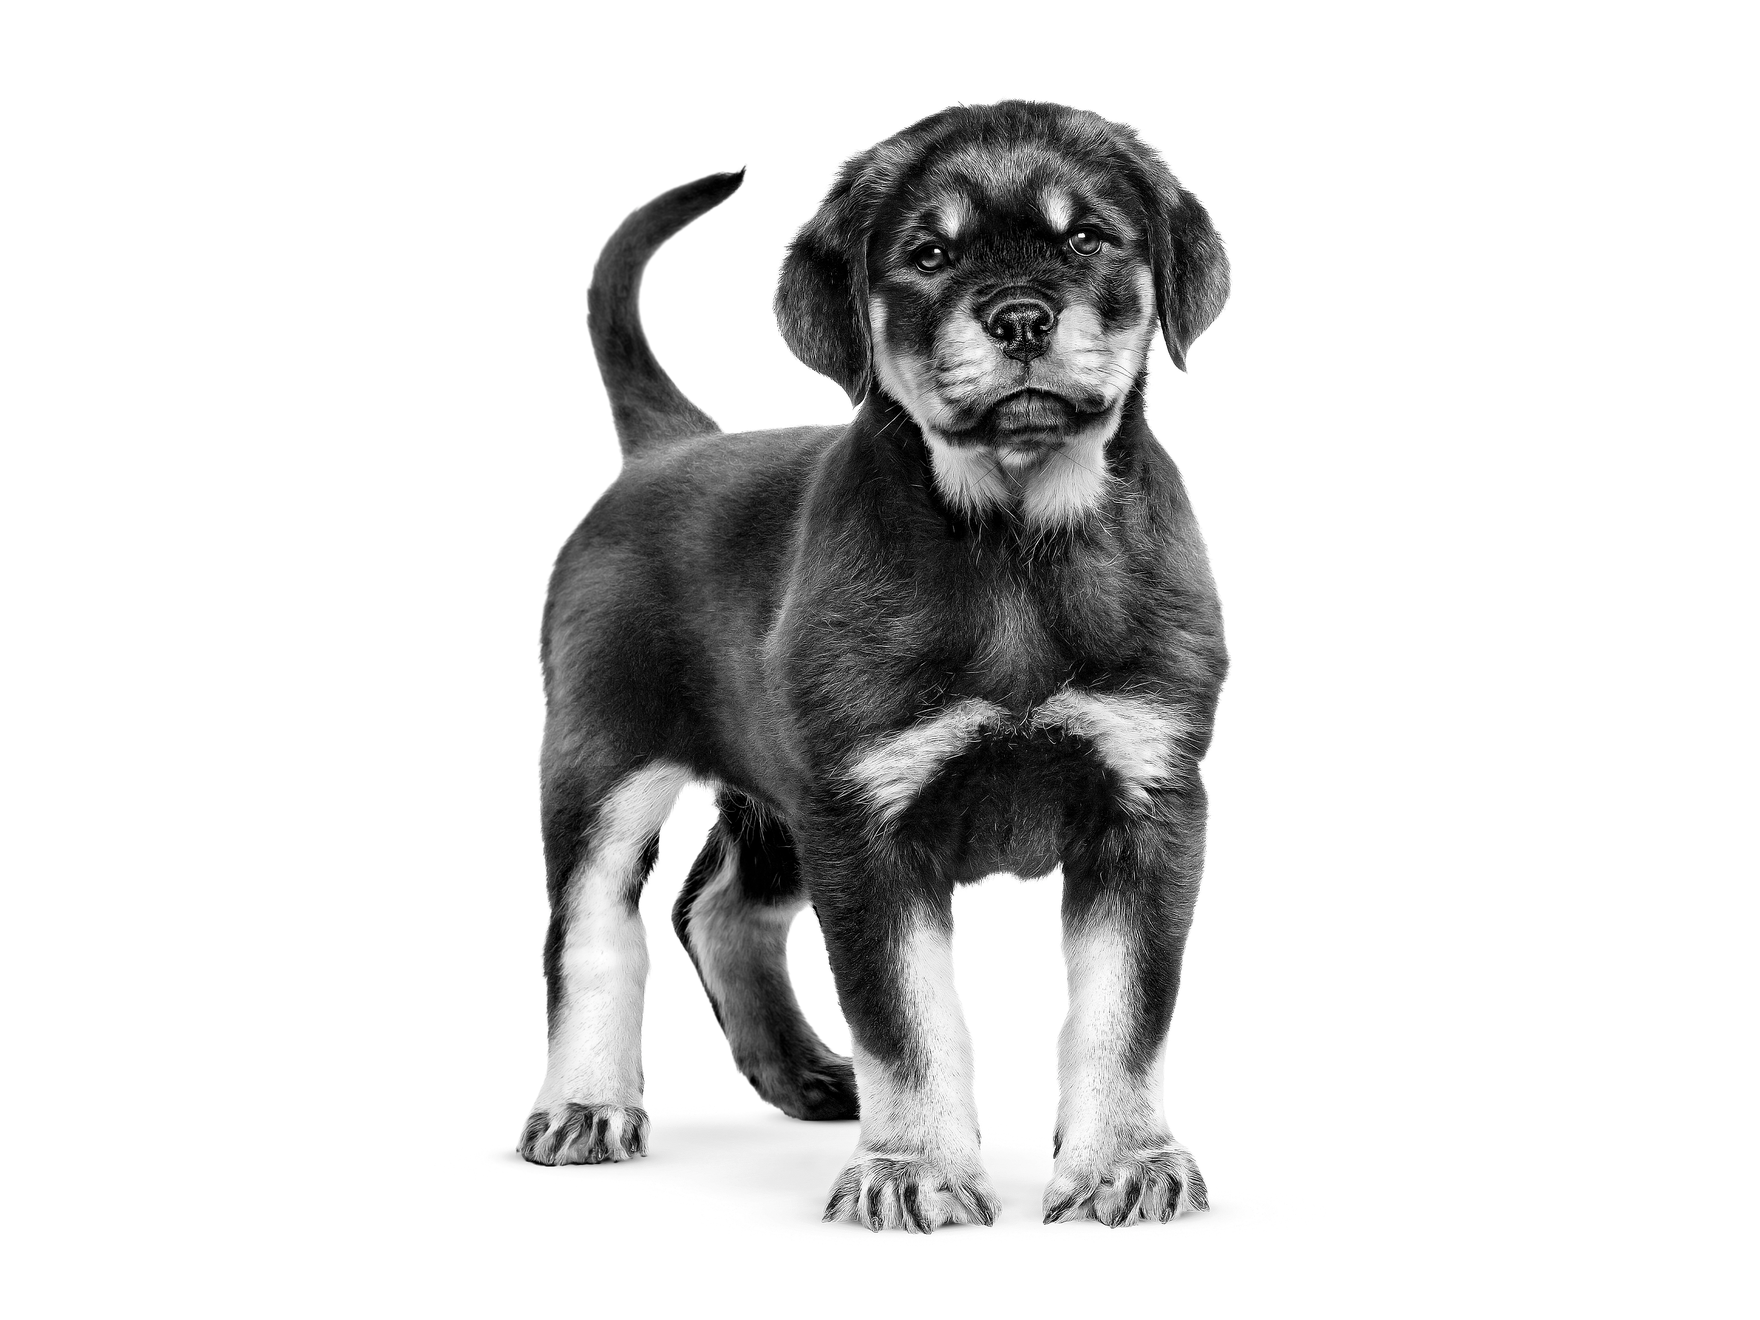 Rottweiler puppy standing looking at camera in black and white